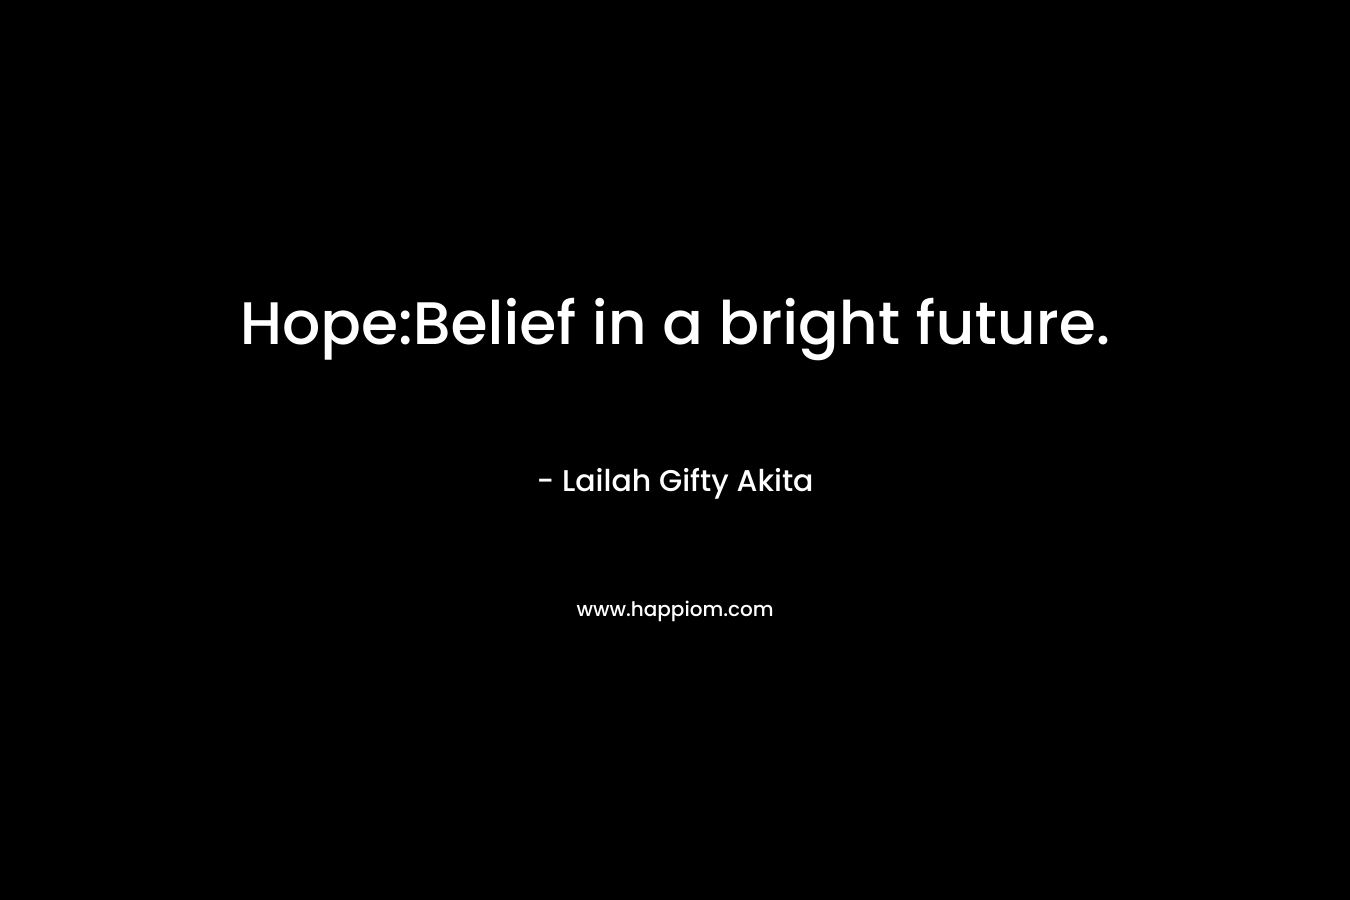 Hope:Belief in a bright future. – Lailah Gifty Akita